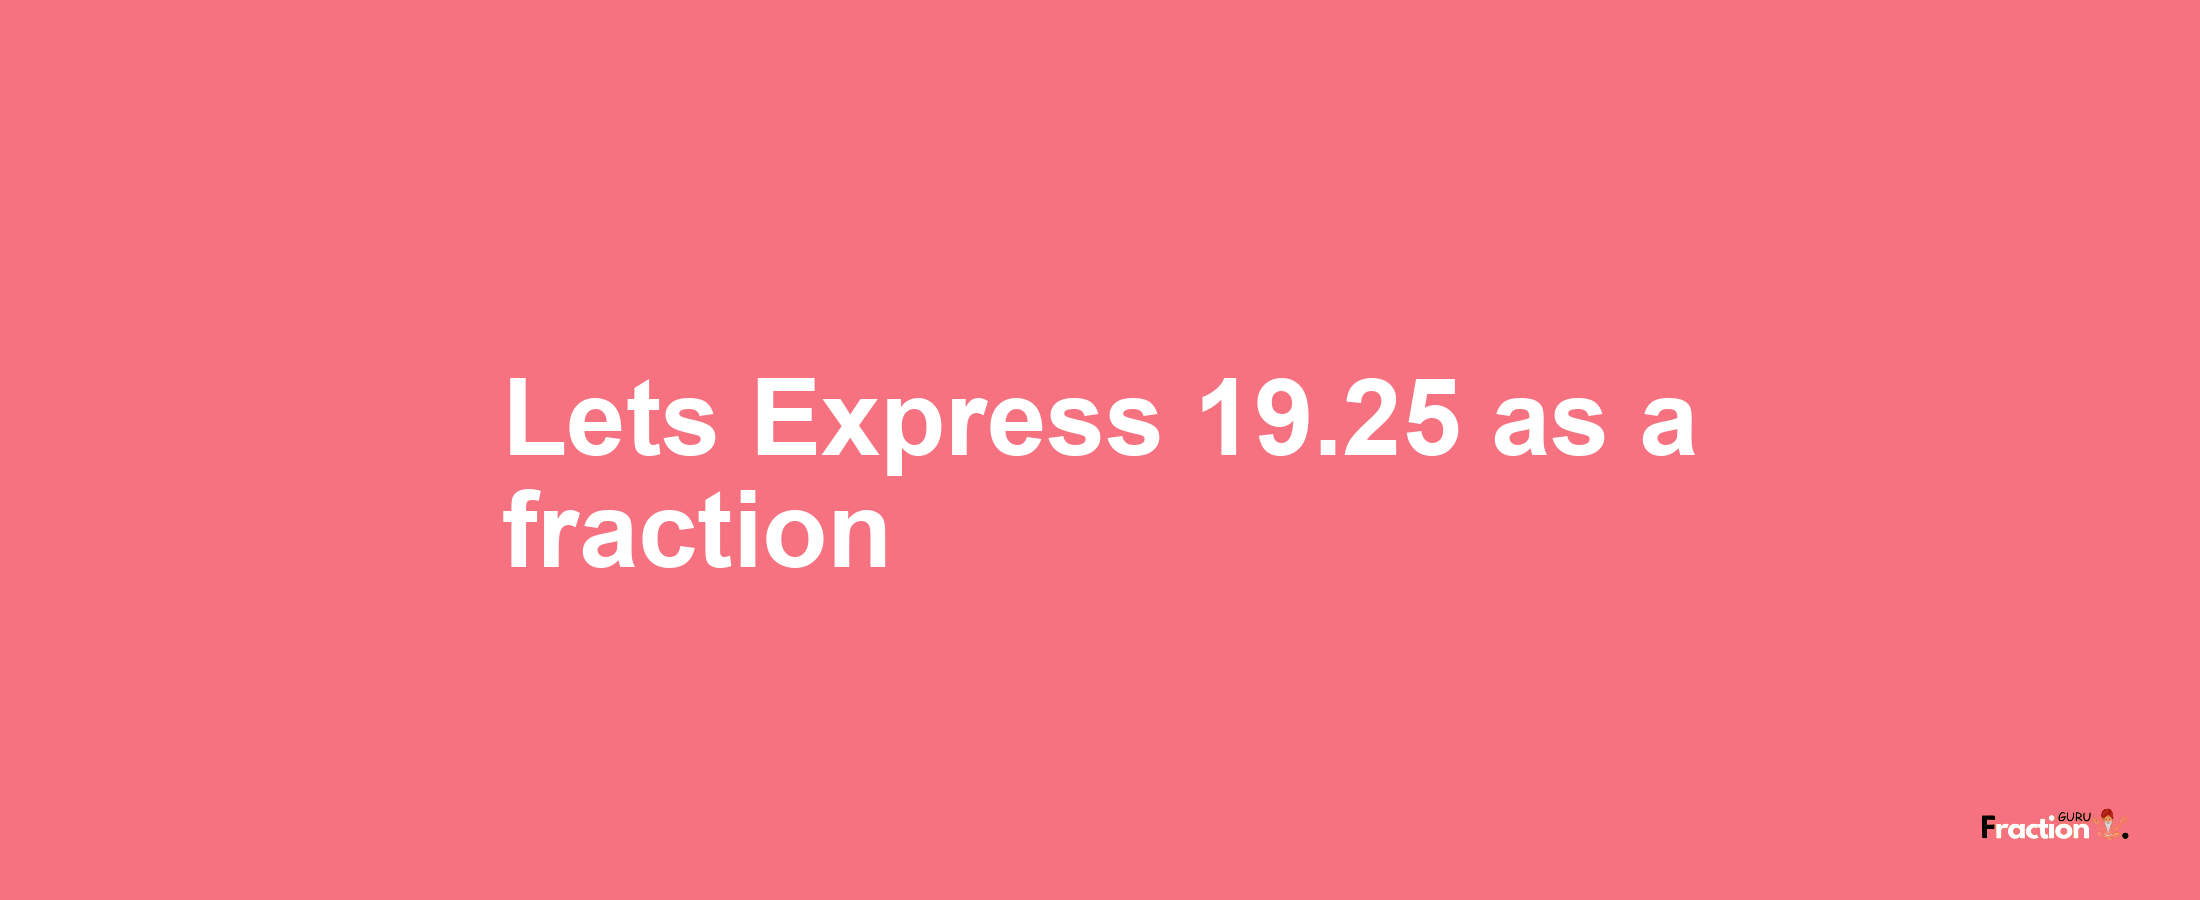 Lets Express 19.25 as afraction